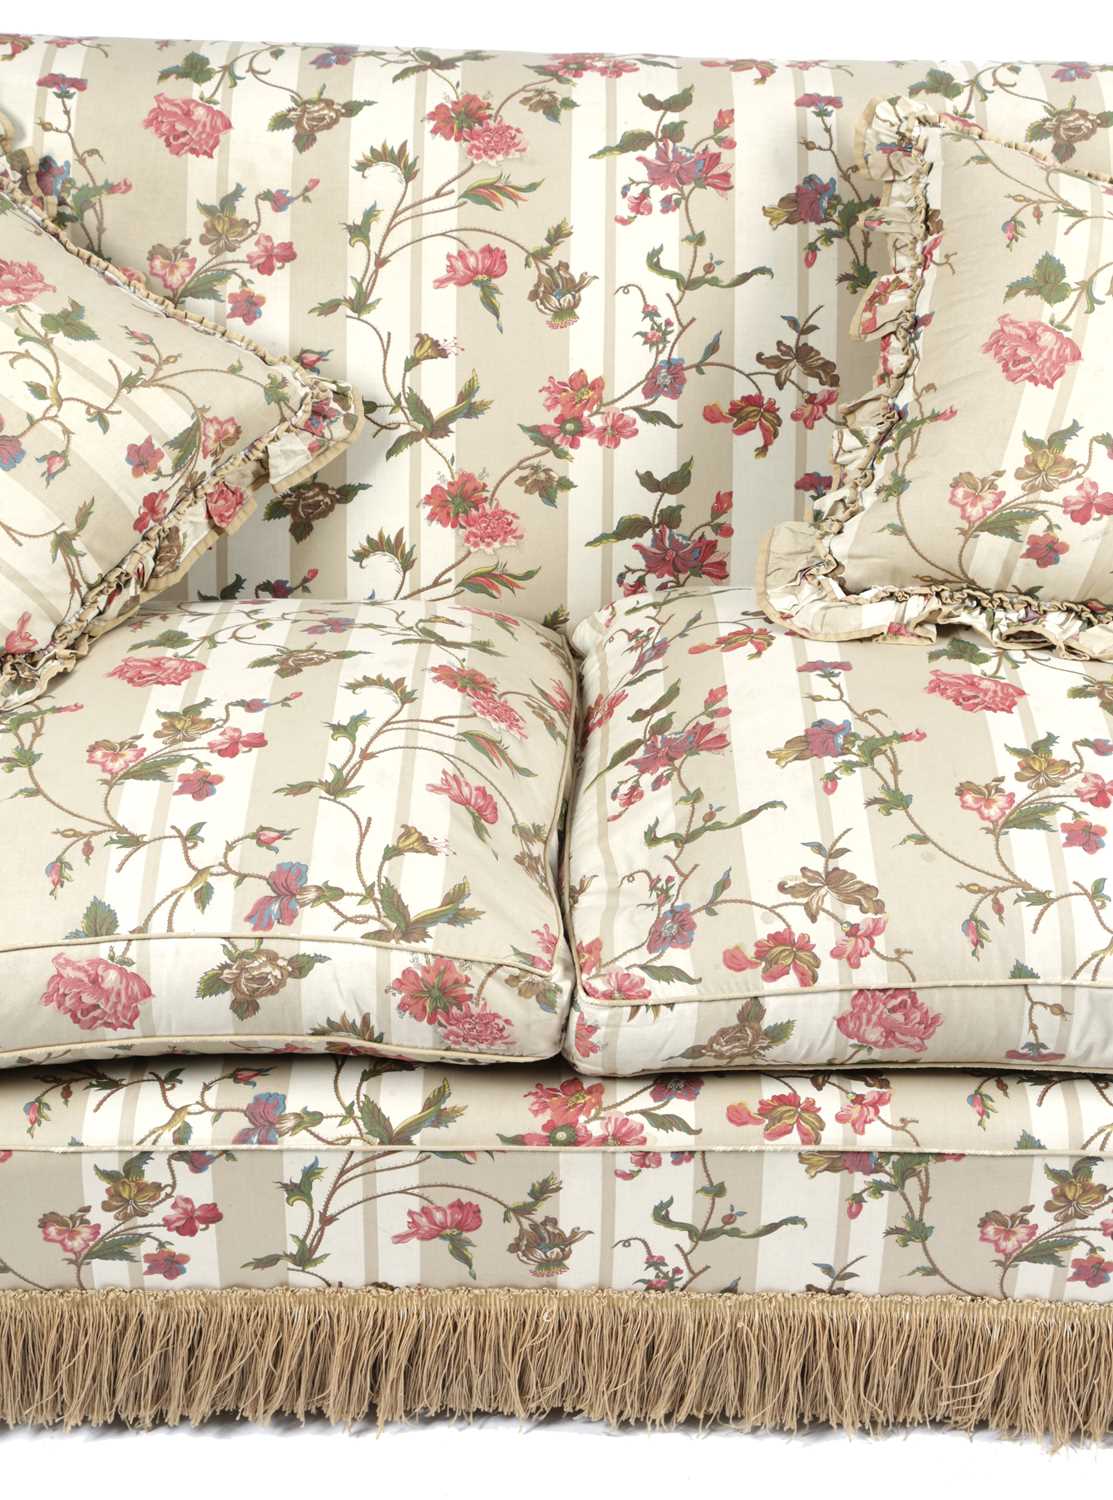 A MODERN TWO SEATER SOFA BY PORTMAN, 20TH CENTURY with chintz floral upholstery, on castors 82.5cm - Image 3 of 3